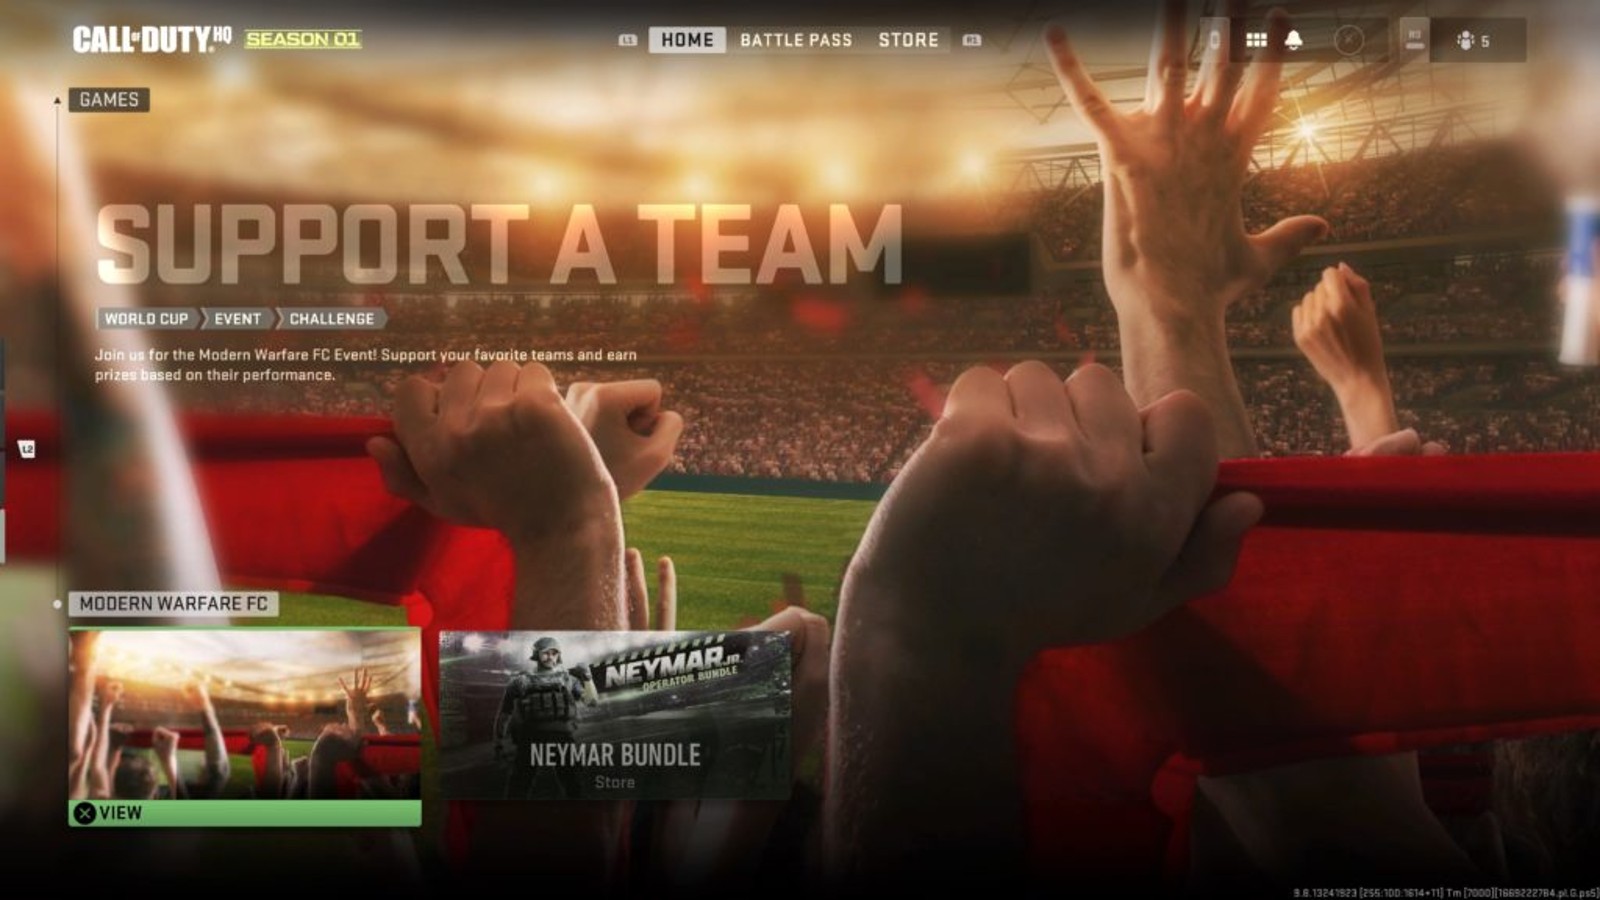 How to play Modern Warfare 2's World Cup mode: Get free rewards on Support a Team